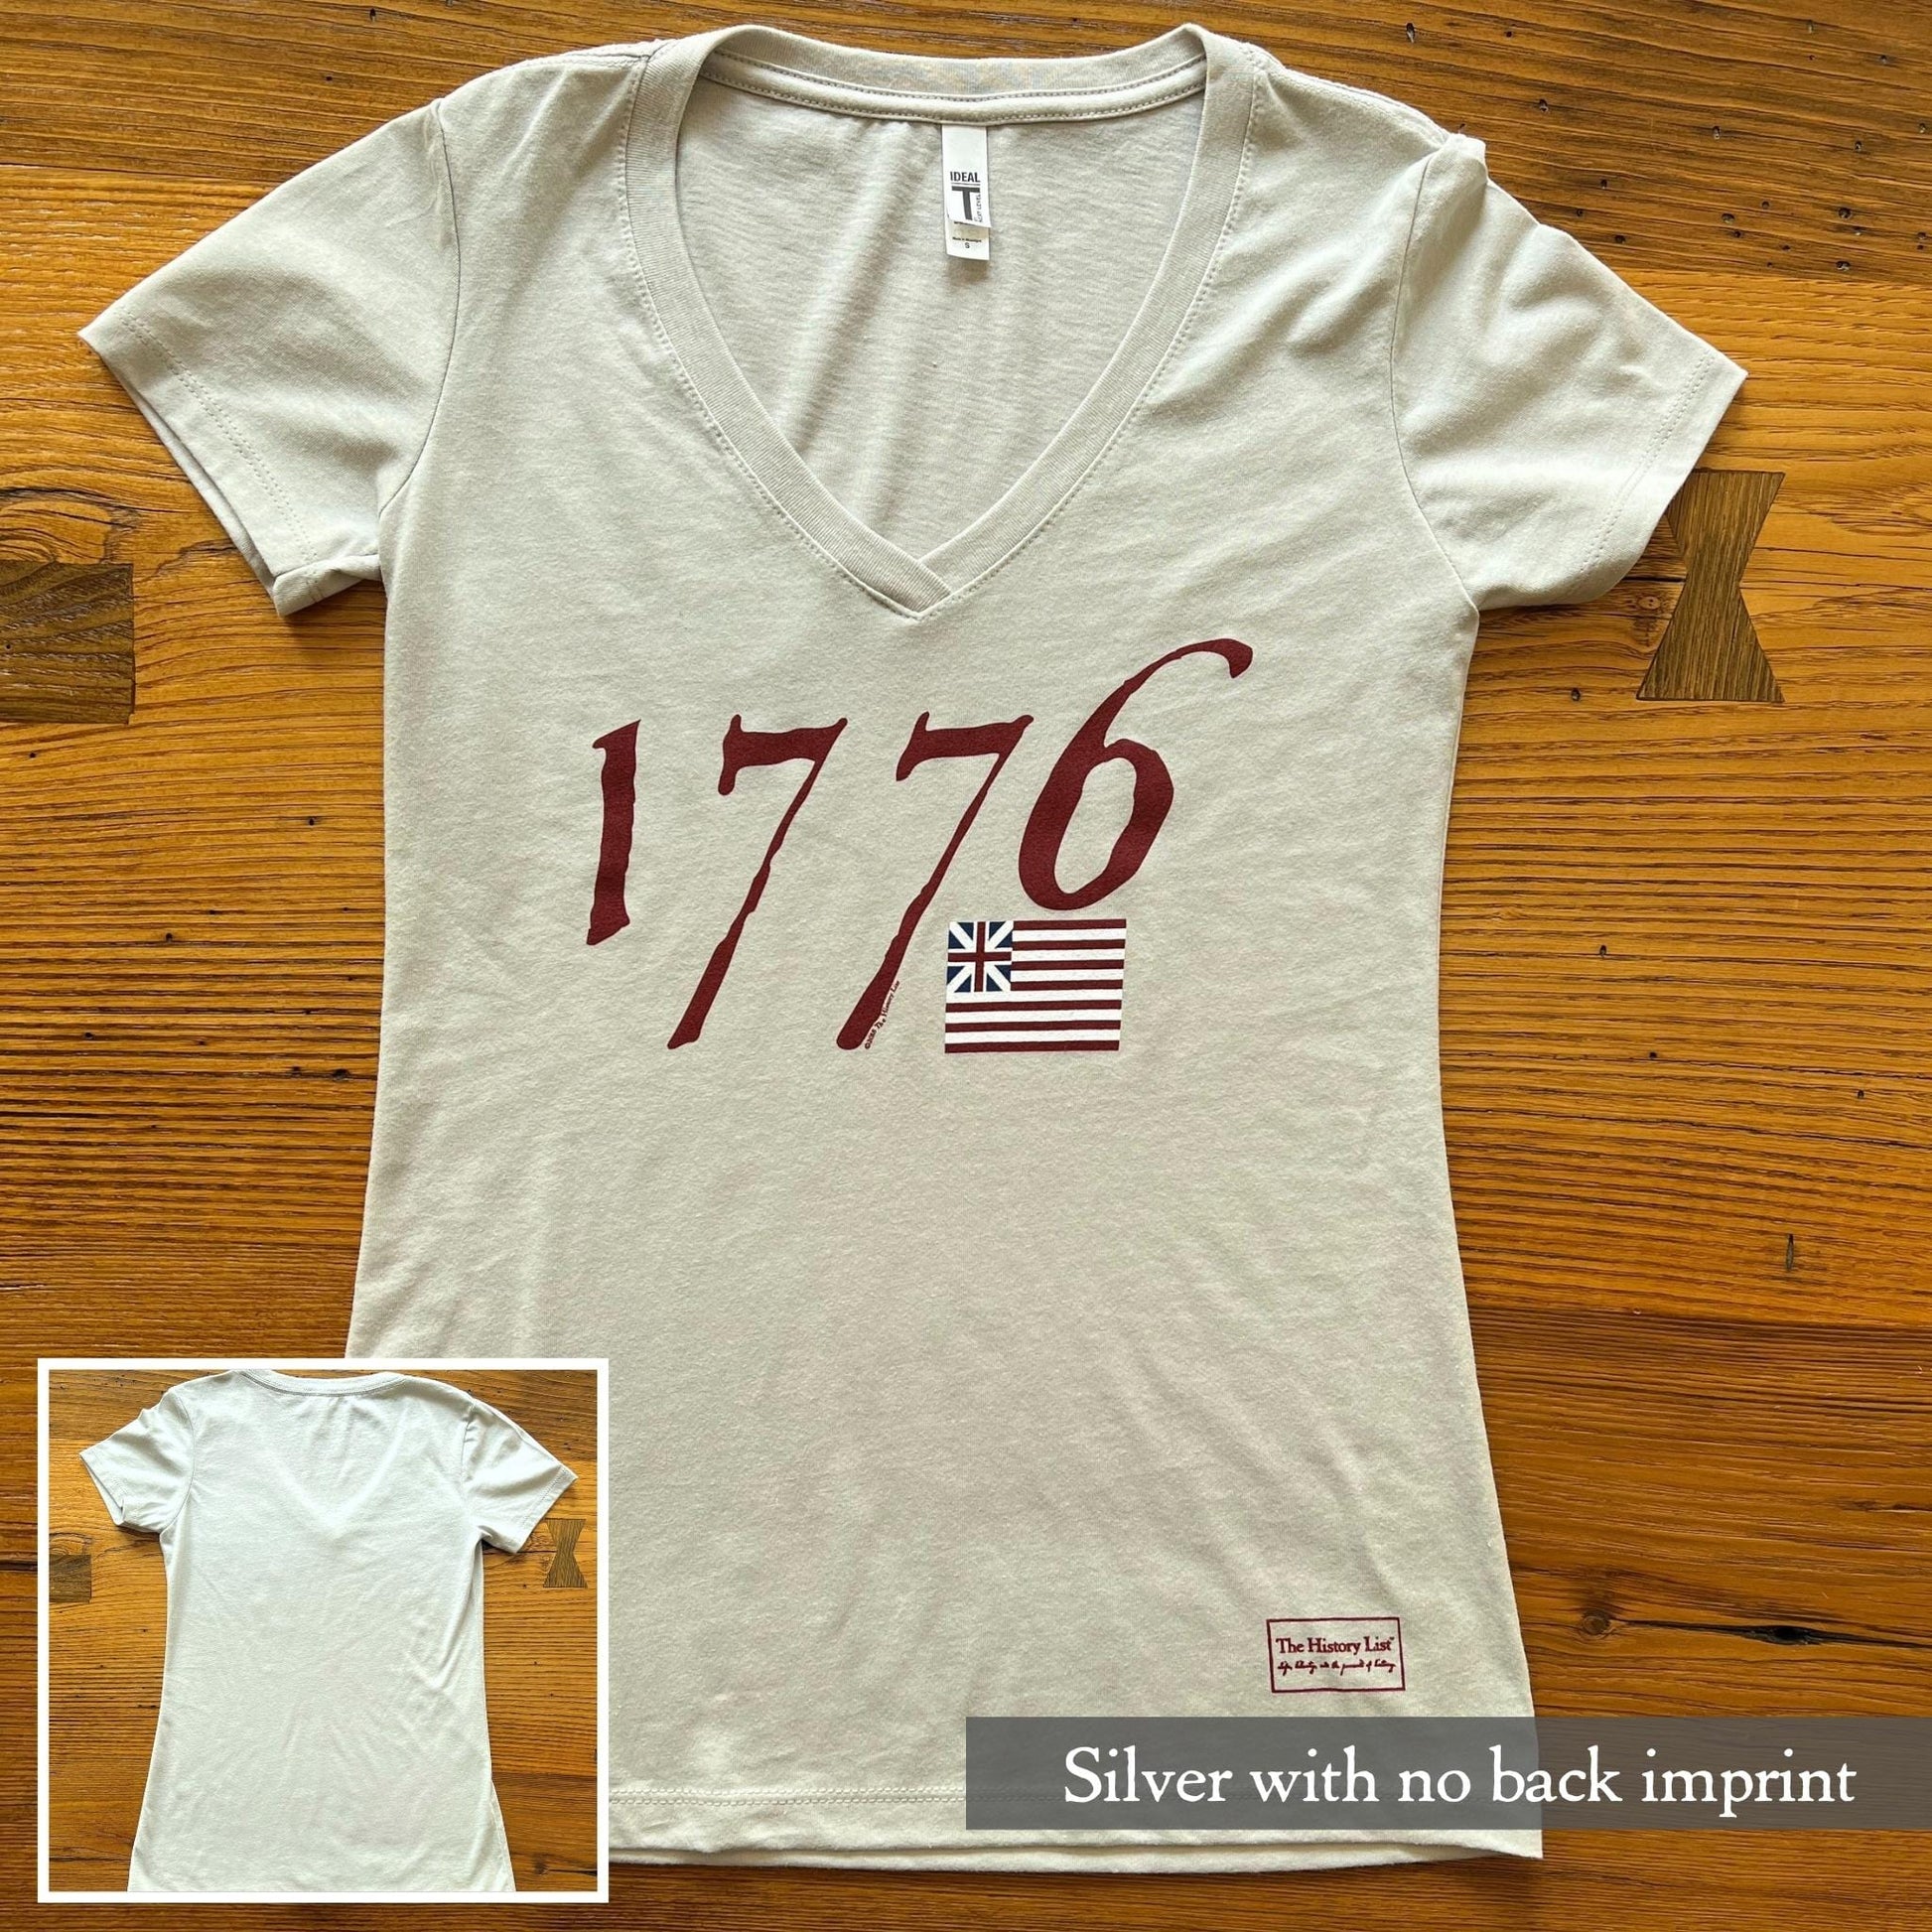 "We hold these truths - July 4, 1776” v-neck shirt from The History List store in Silver with no back imprint